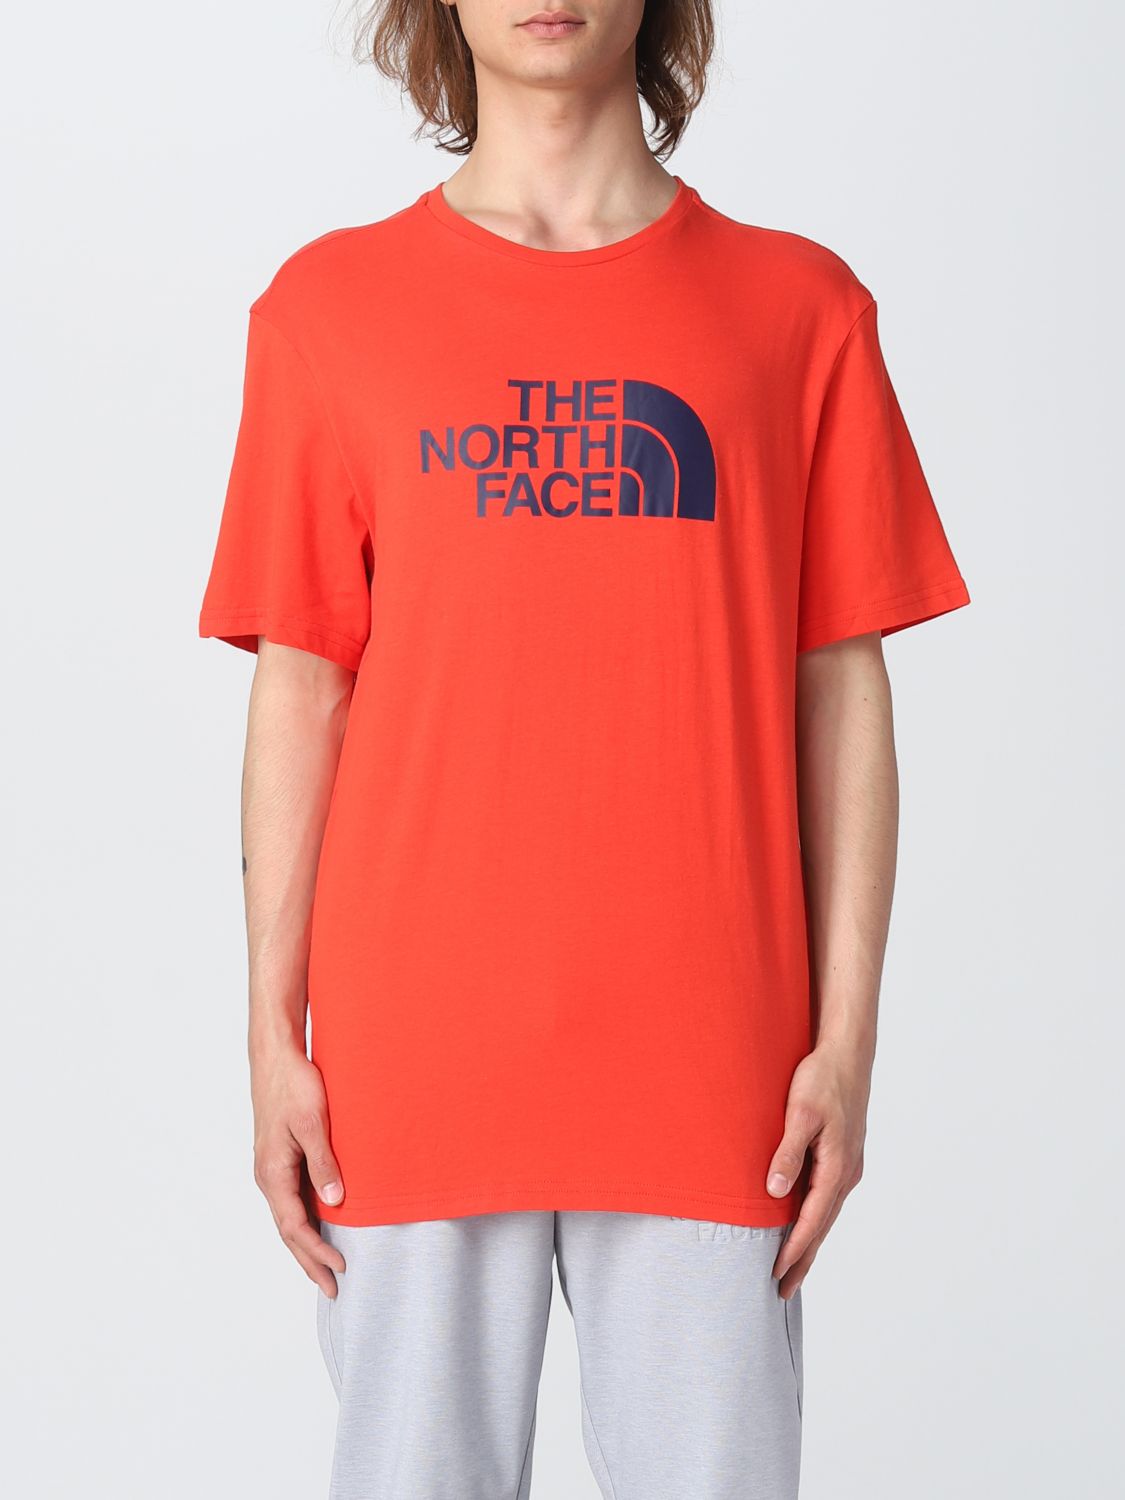 The North Face T-shirt  Men Color Coral